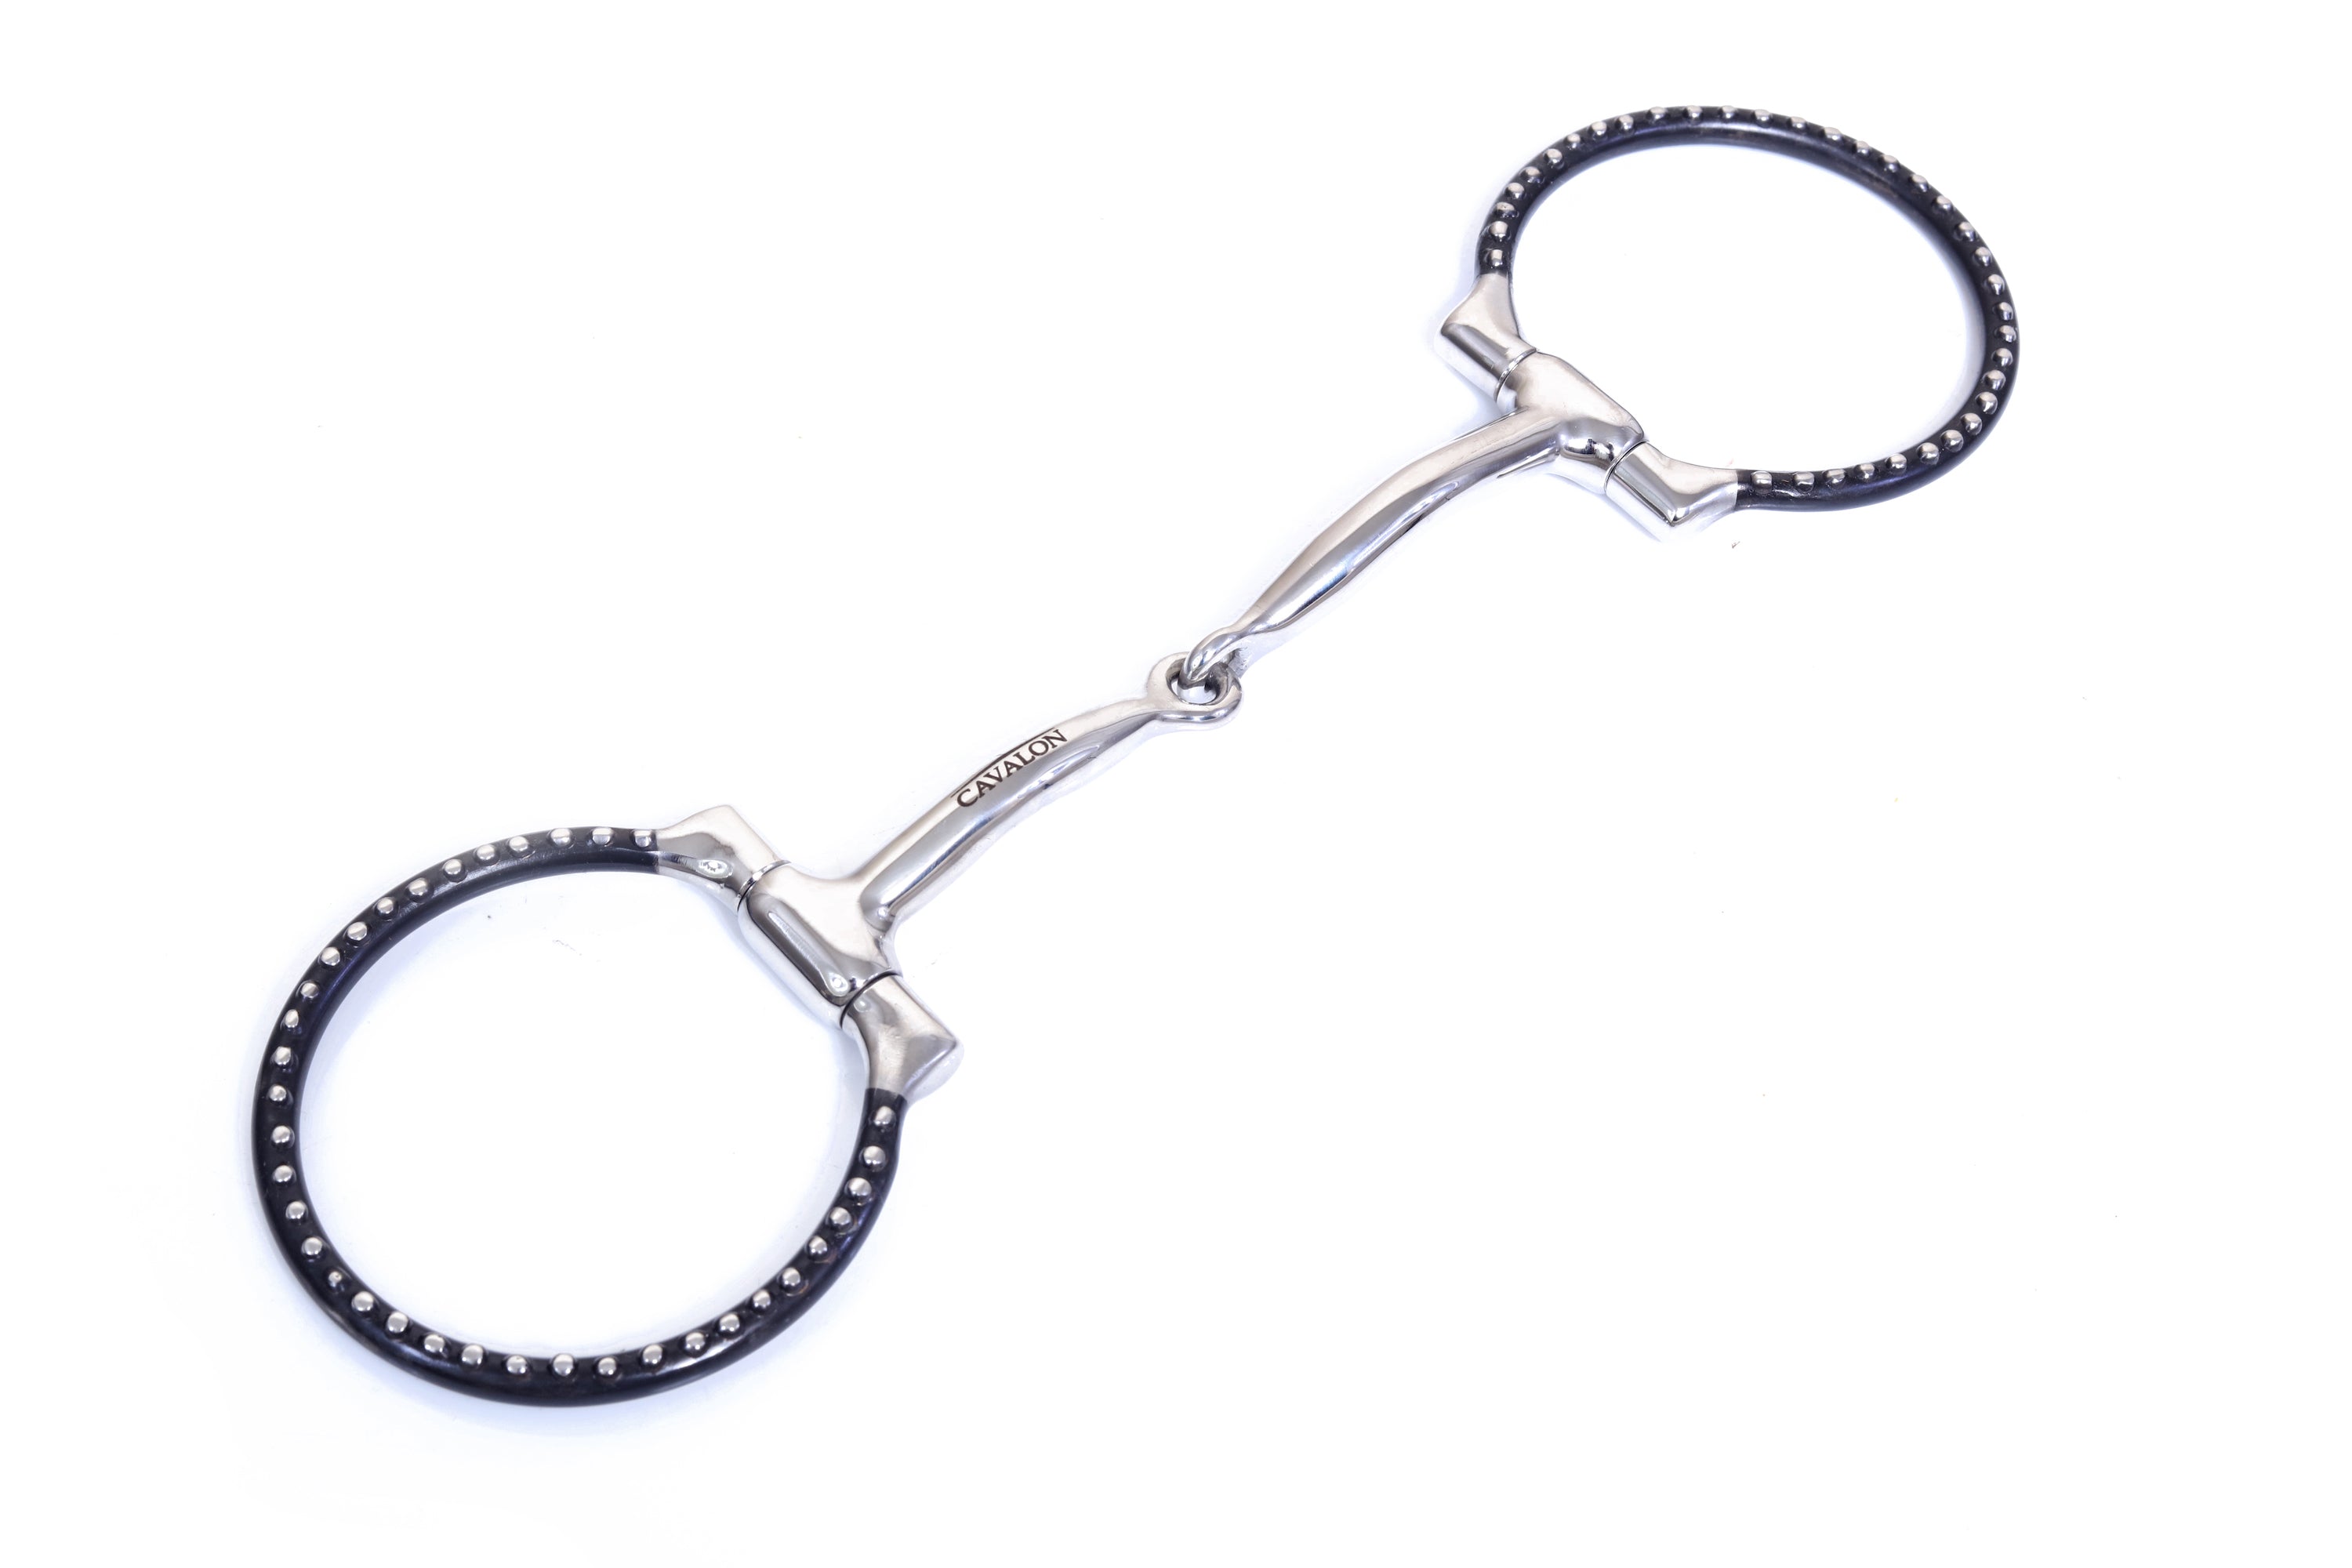 Professional's Choice Smooth Dogbone O-Ring Snaffle Bit: Coolhorse